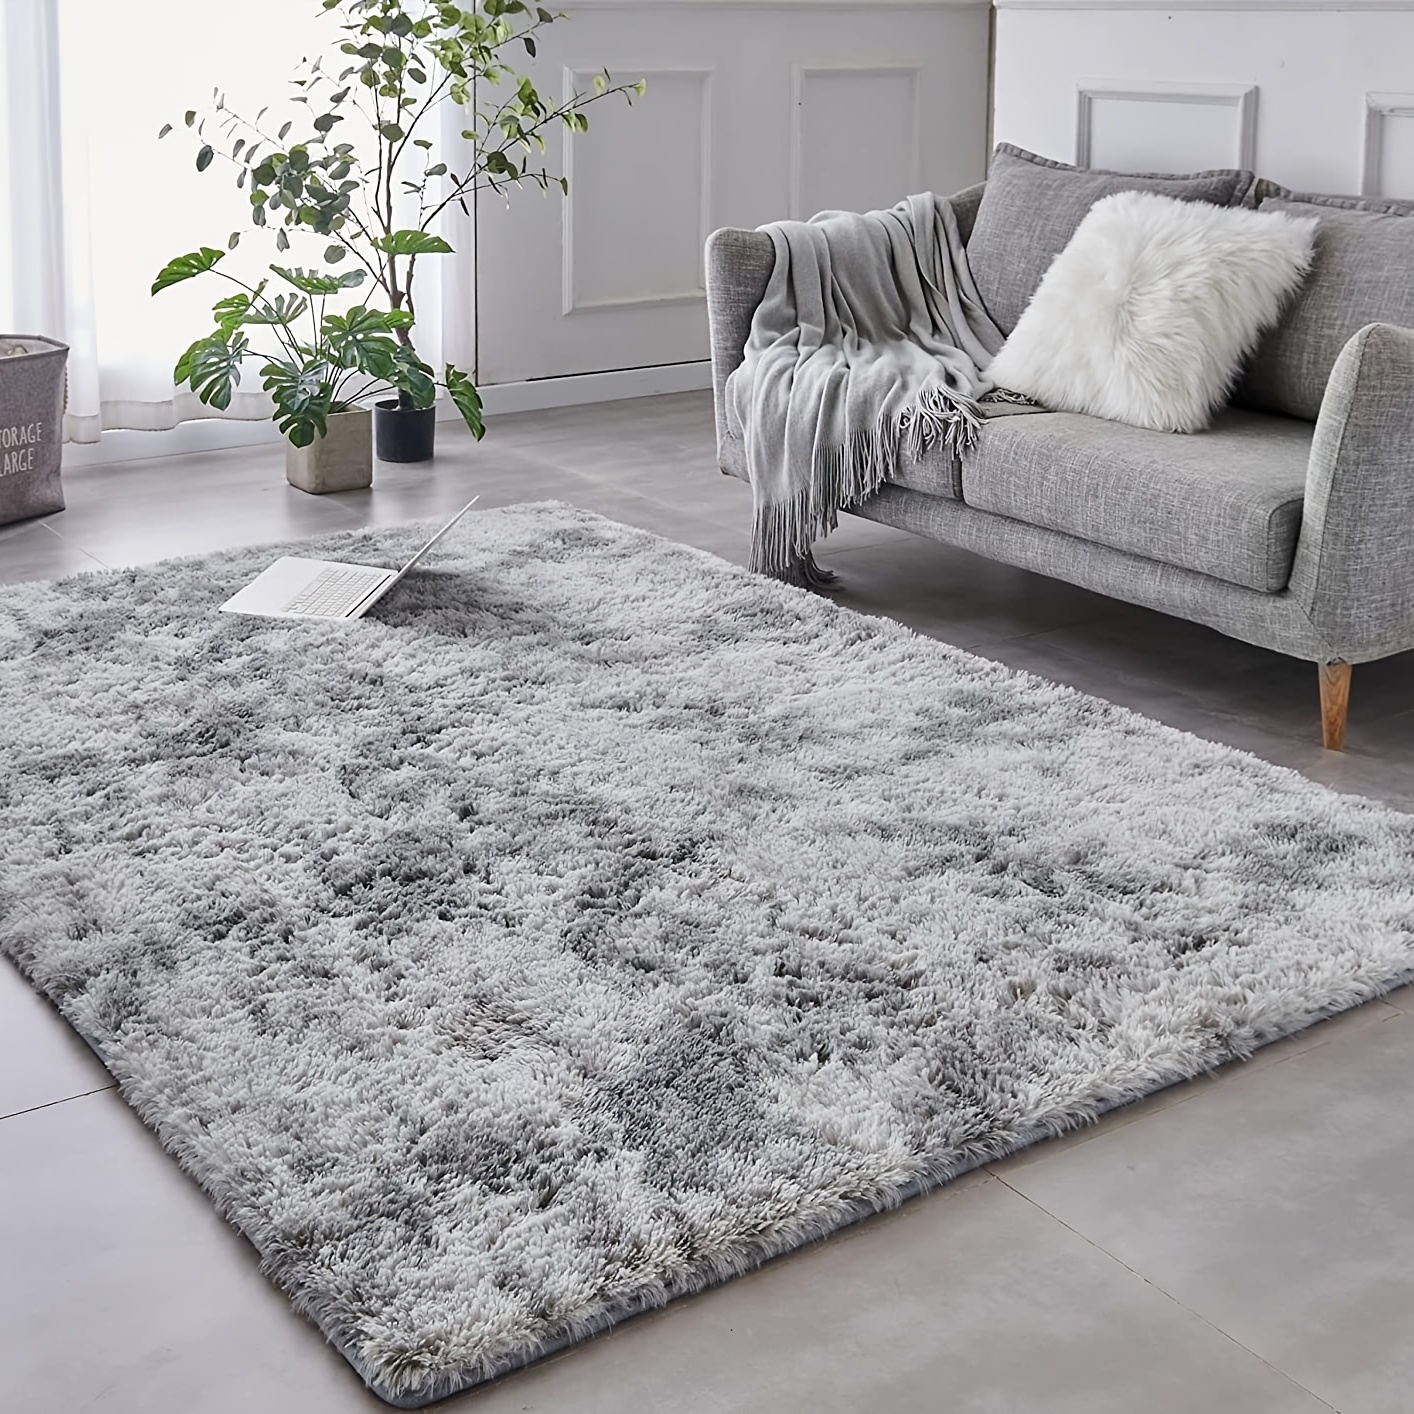 Soft Plush Shag Area Rugs For Living Room, Fluffy Shaggy Floor Carpet For  Bedroom, Home Decor Area Rugs, Cute Luxury Non-slip Machine Washable  Carpet, Living Room Bedroom Game Room Dormitory Carpet Room